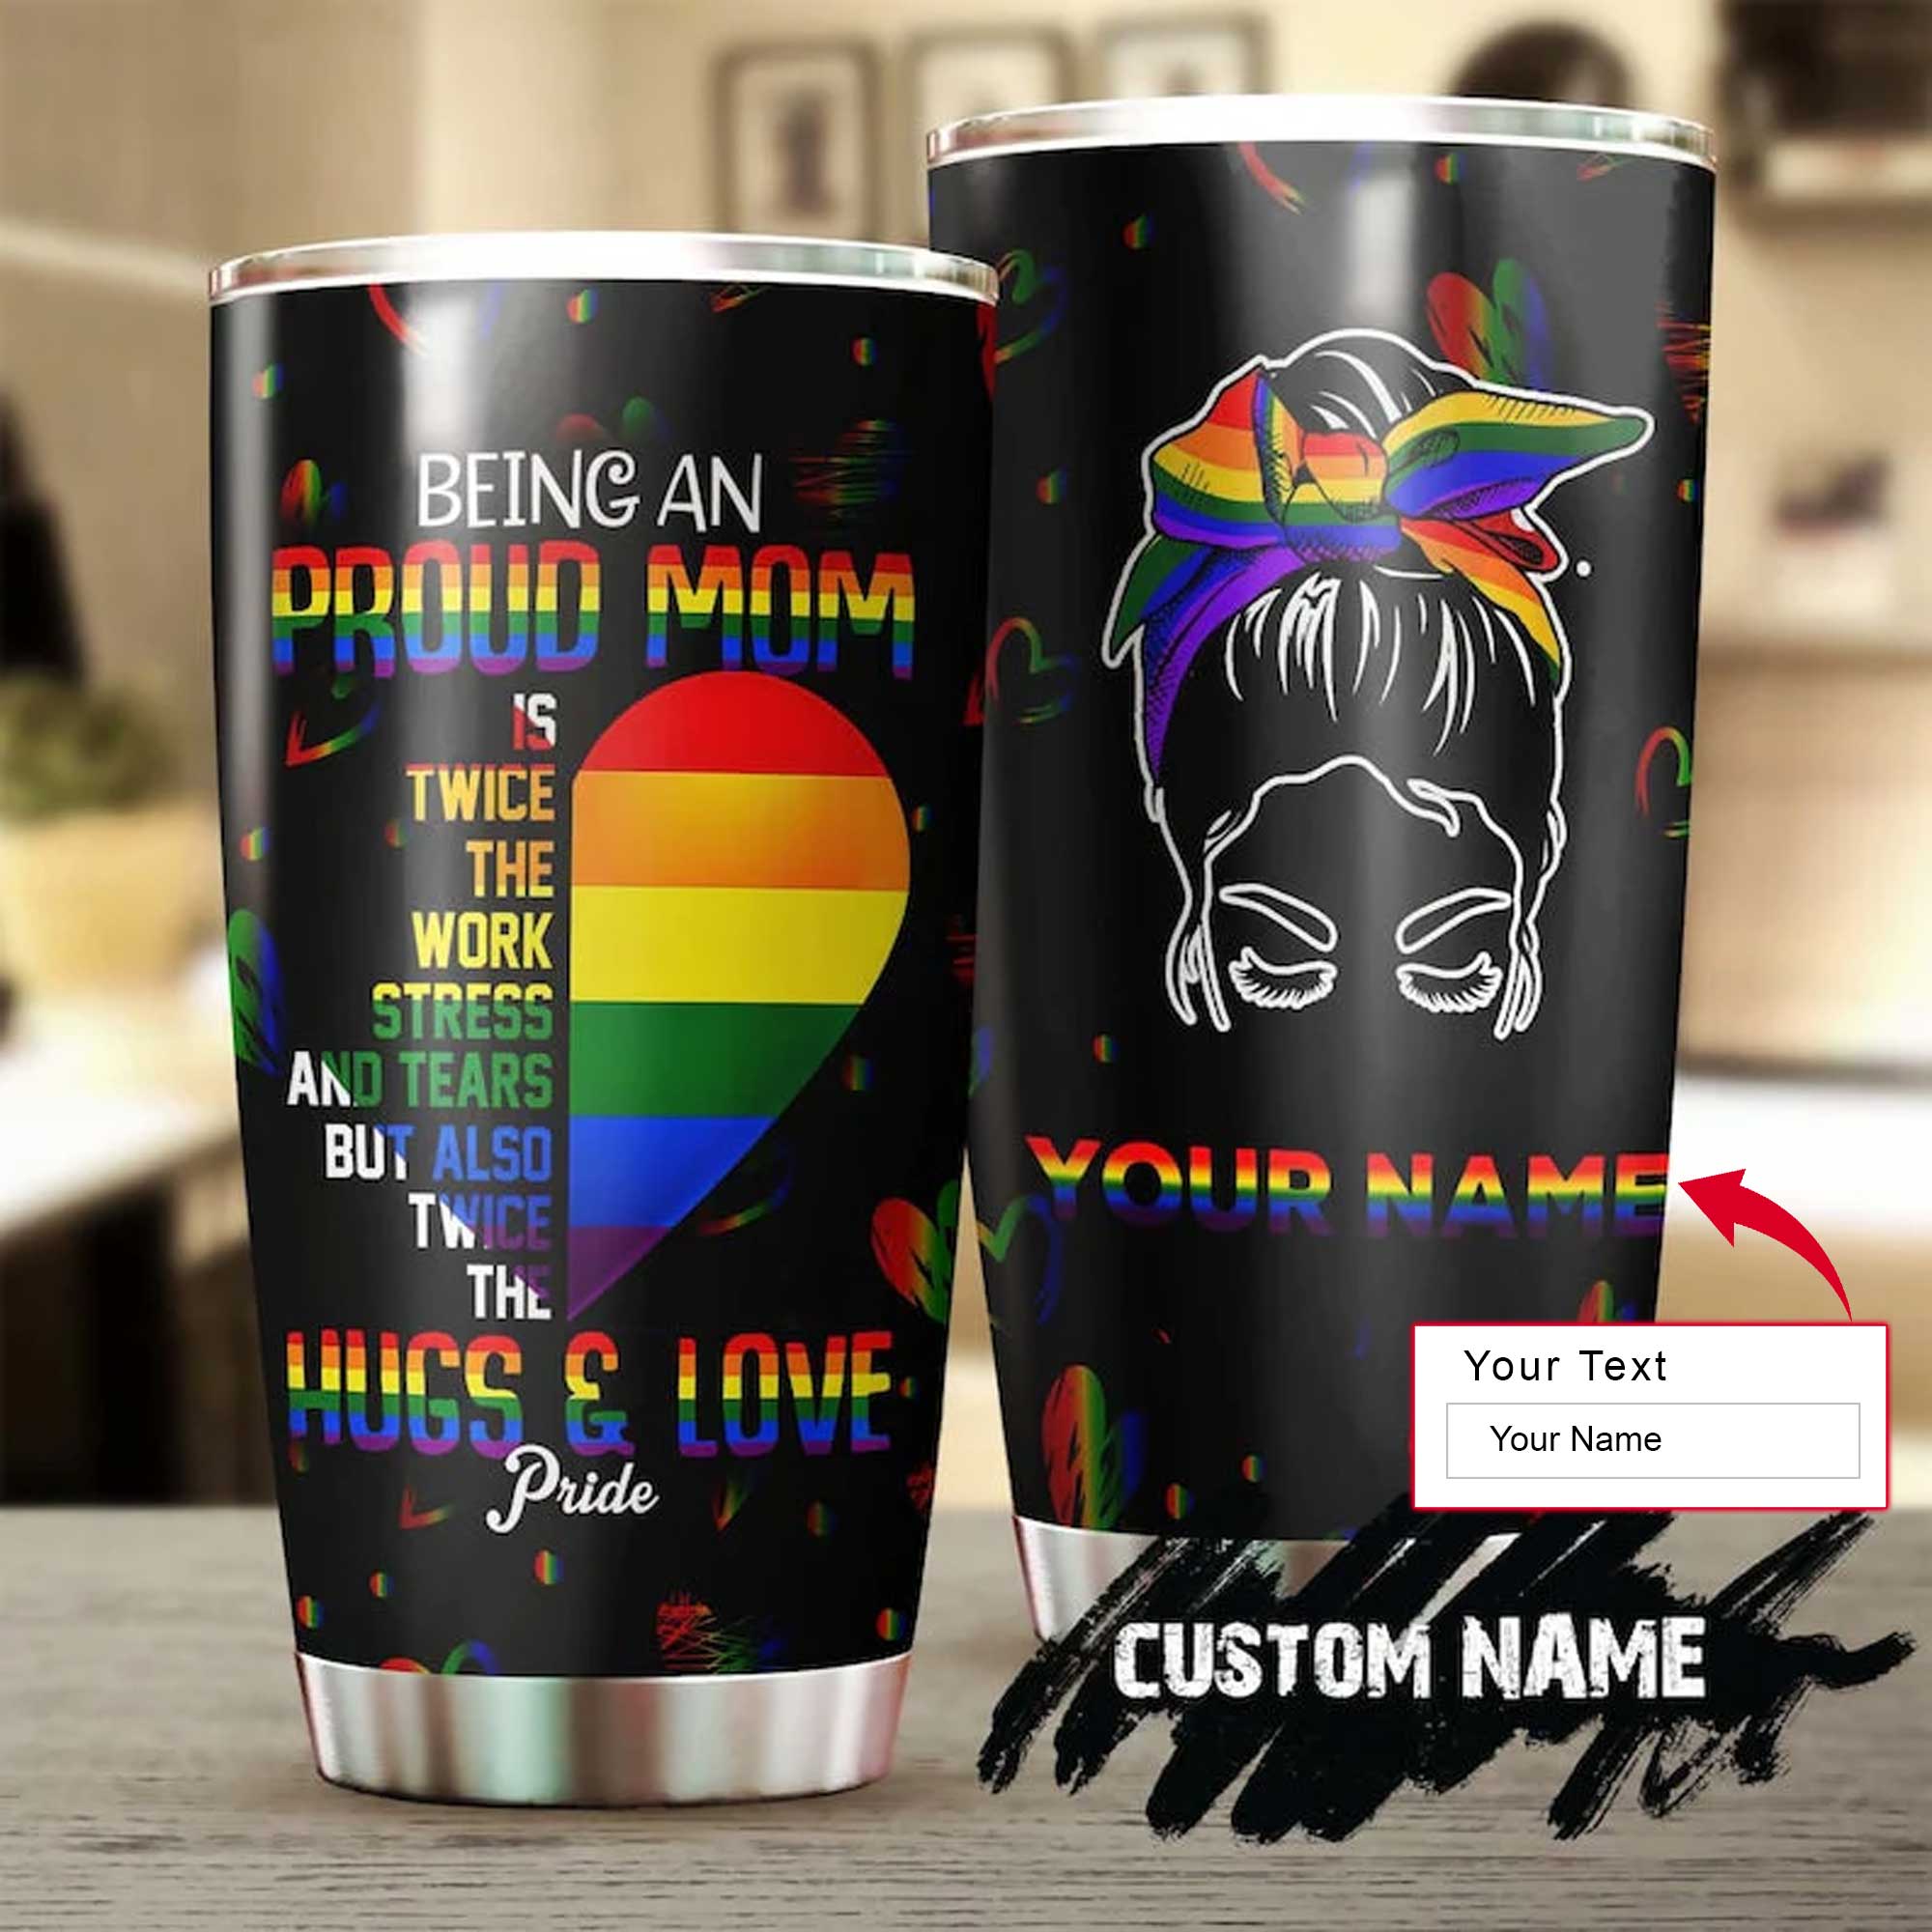 Personalized Mother's Day Gift Tumbler - Custom Gift For Mother's Day, Presents For LGBT Mom From Son Daughter - LGBT Mom Hugs Love Pride Tumbler